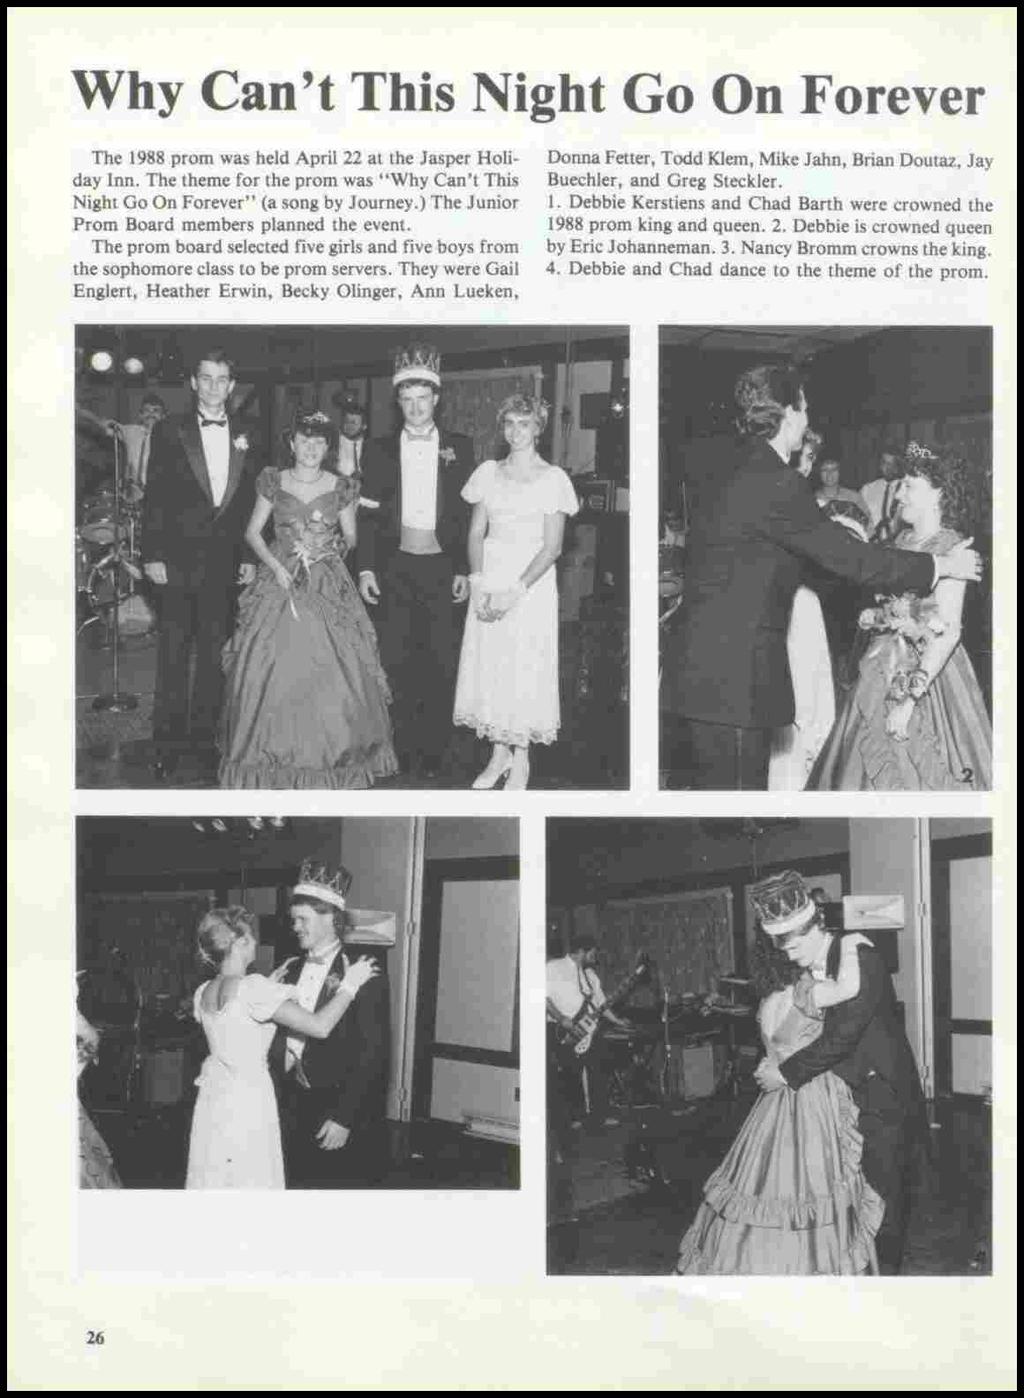 Why Can't This Night Go On Forever The 1988 prom was held April 22 at the Jasper Holiday Inn. The theme for the prom was "Why Can't This Night Go On Forever" (a song by Journey.